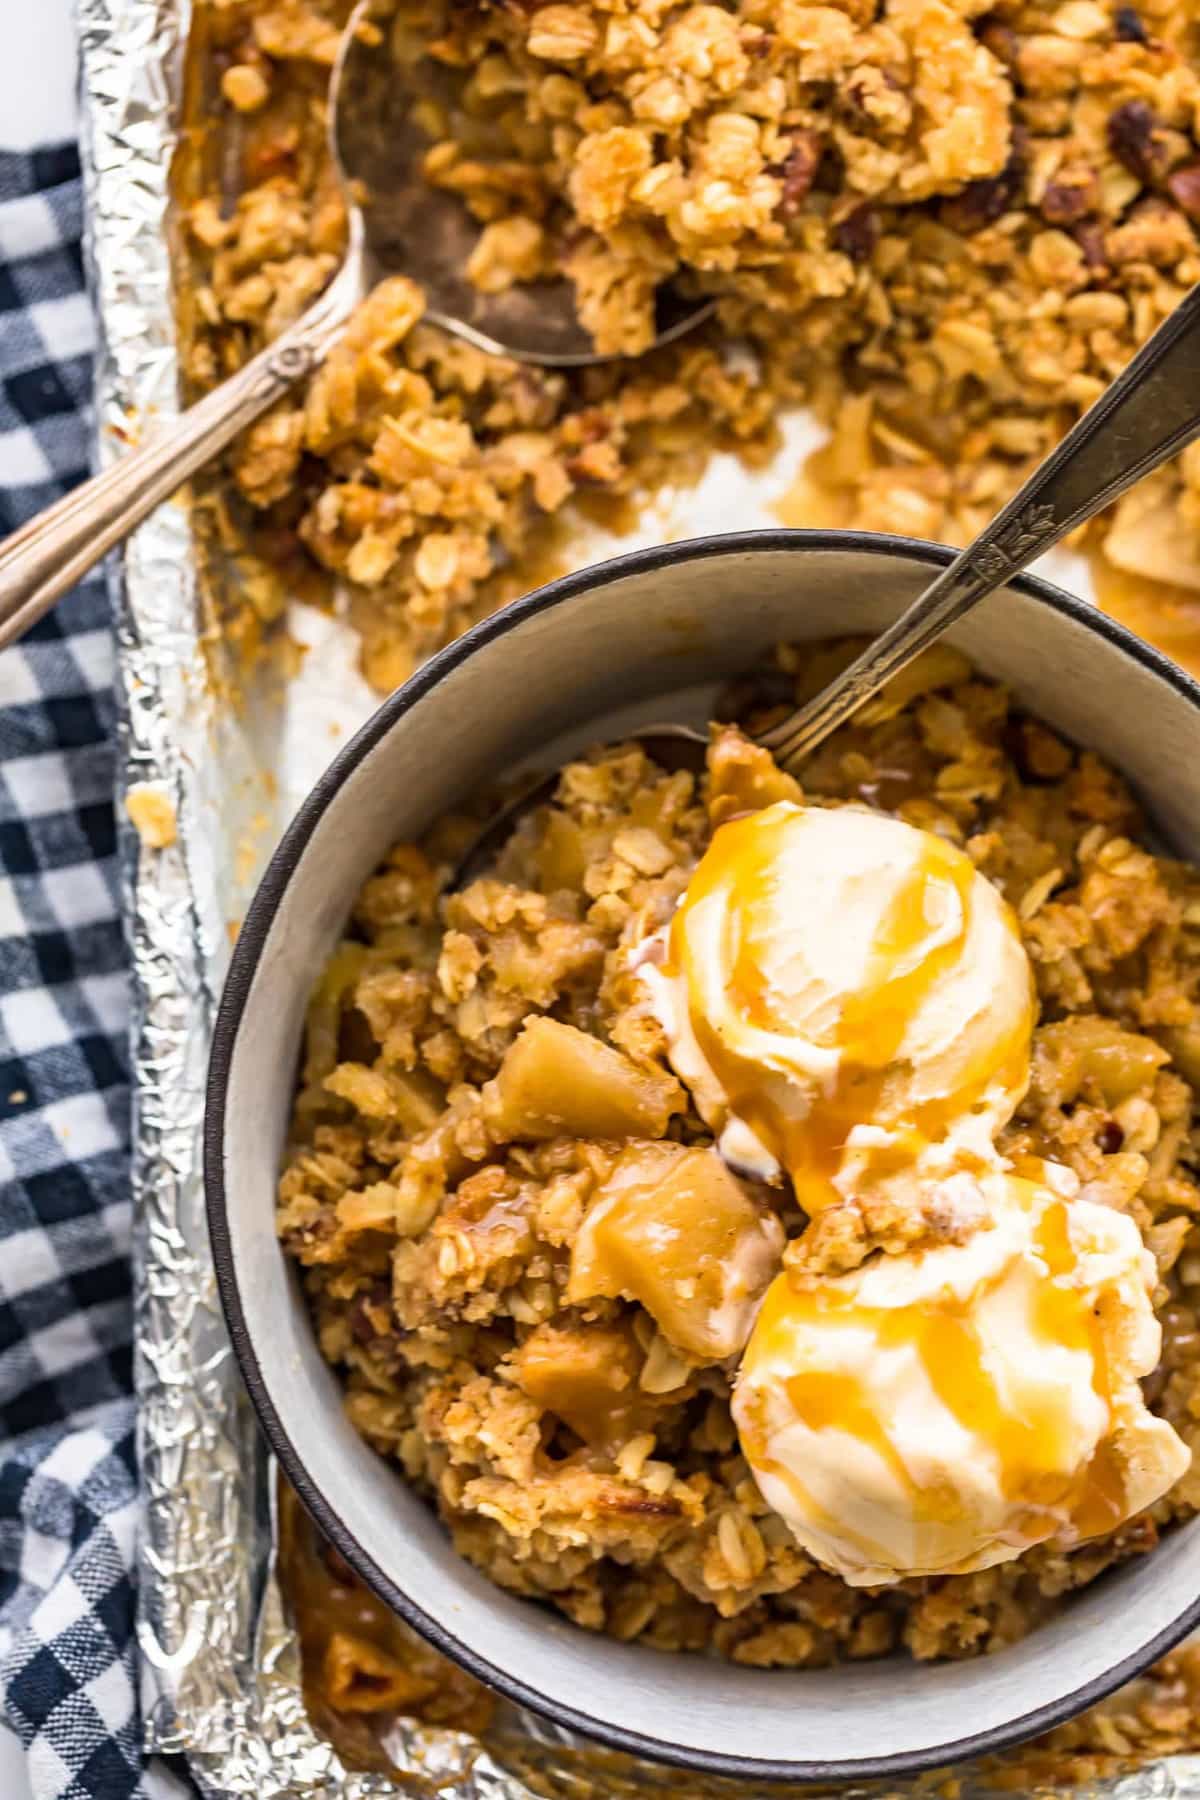 Apple crisp served in a bowl with ice cream